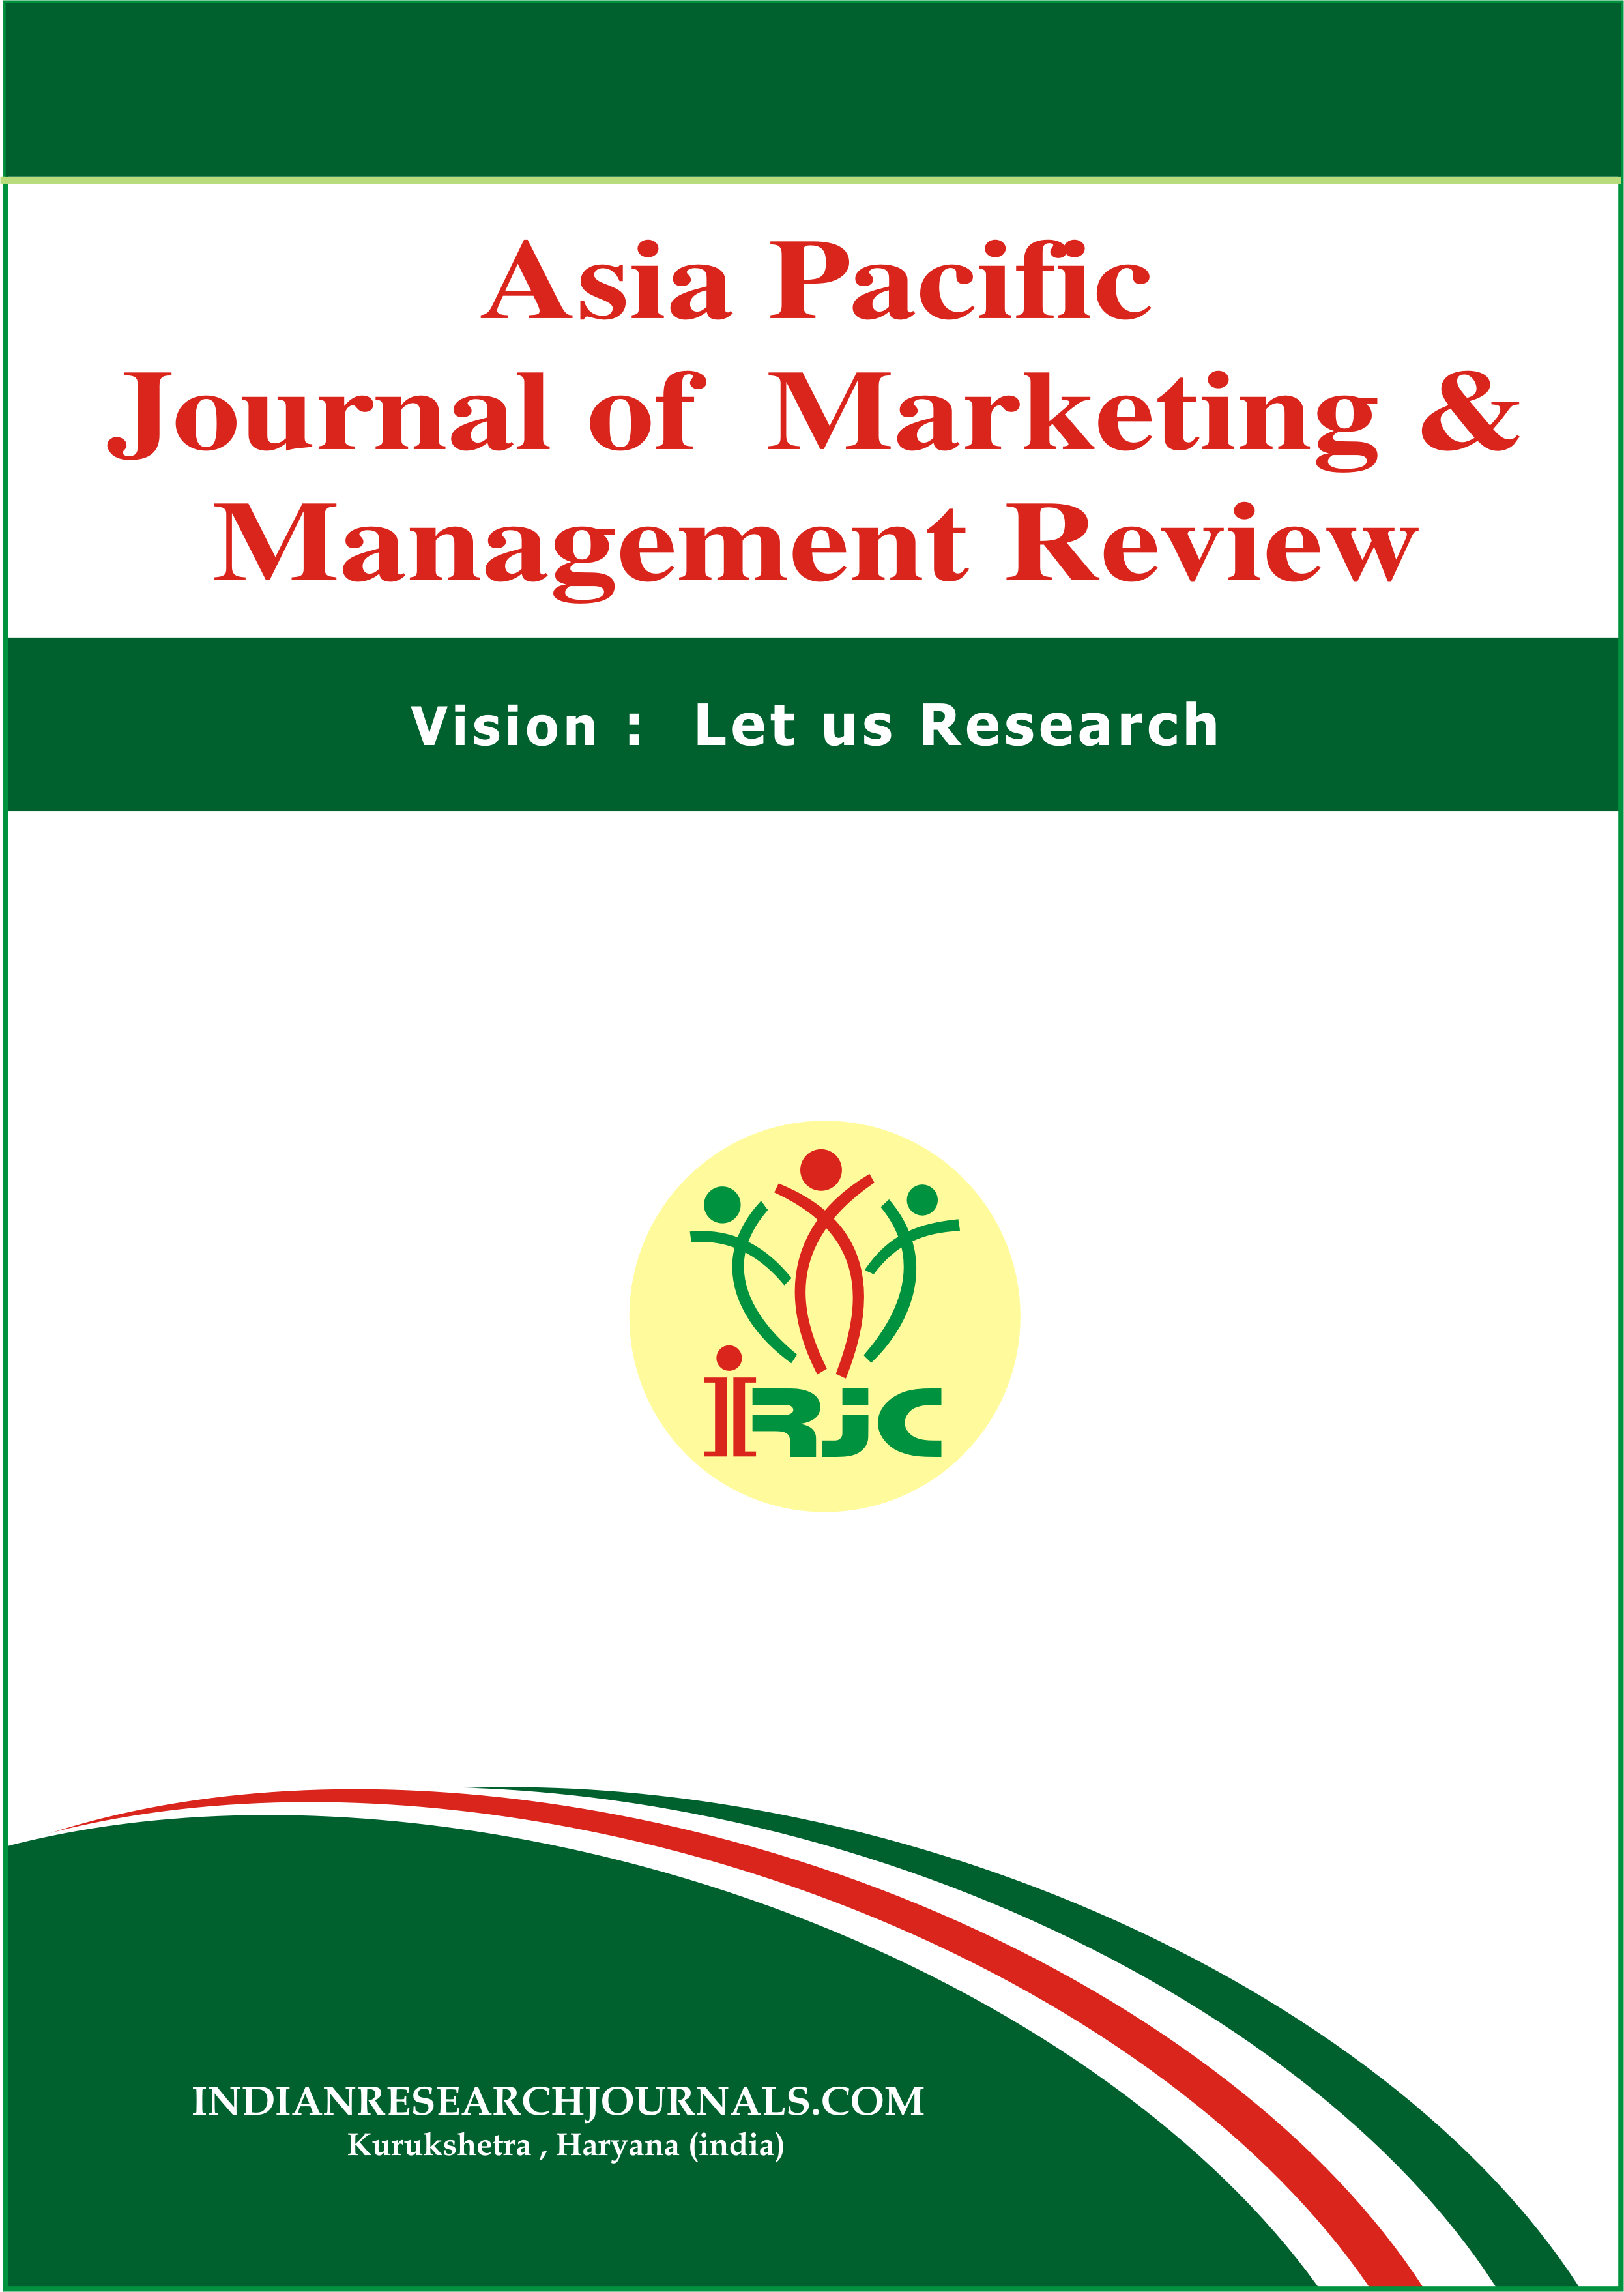 					View Vol. 12 No. 06 (2023): ASIA PACIFIC JOURNAL OF MARKETING & MANAGEMENT REVIEW
				